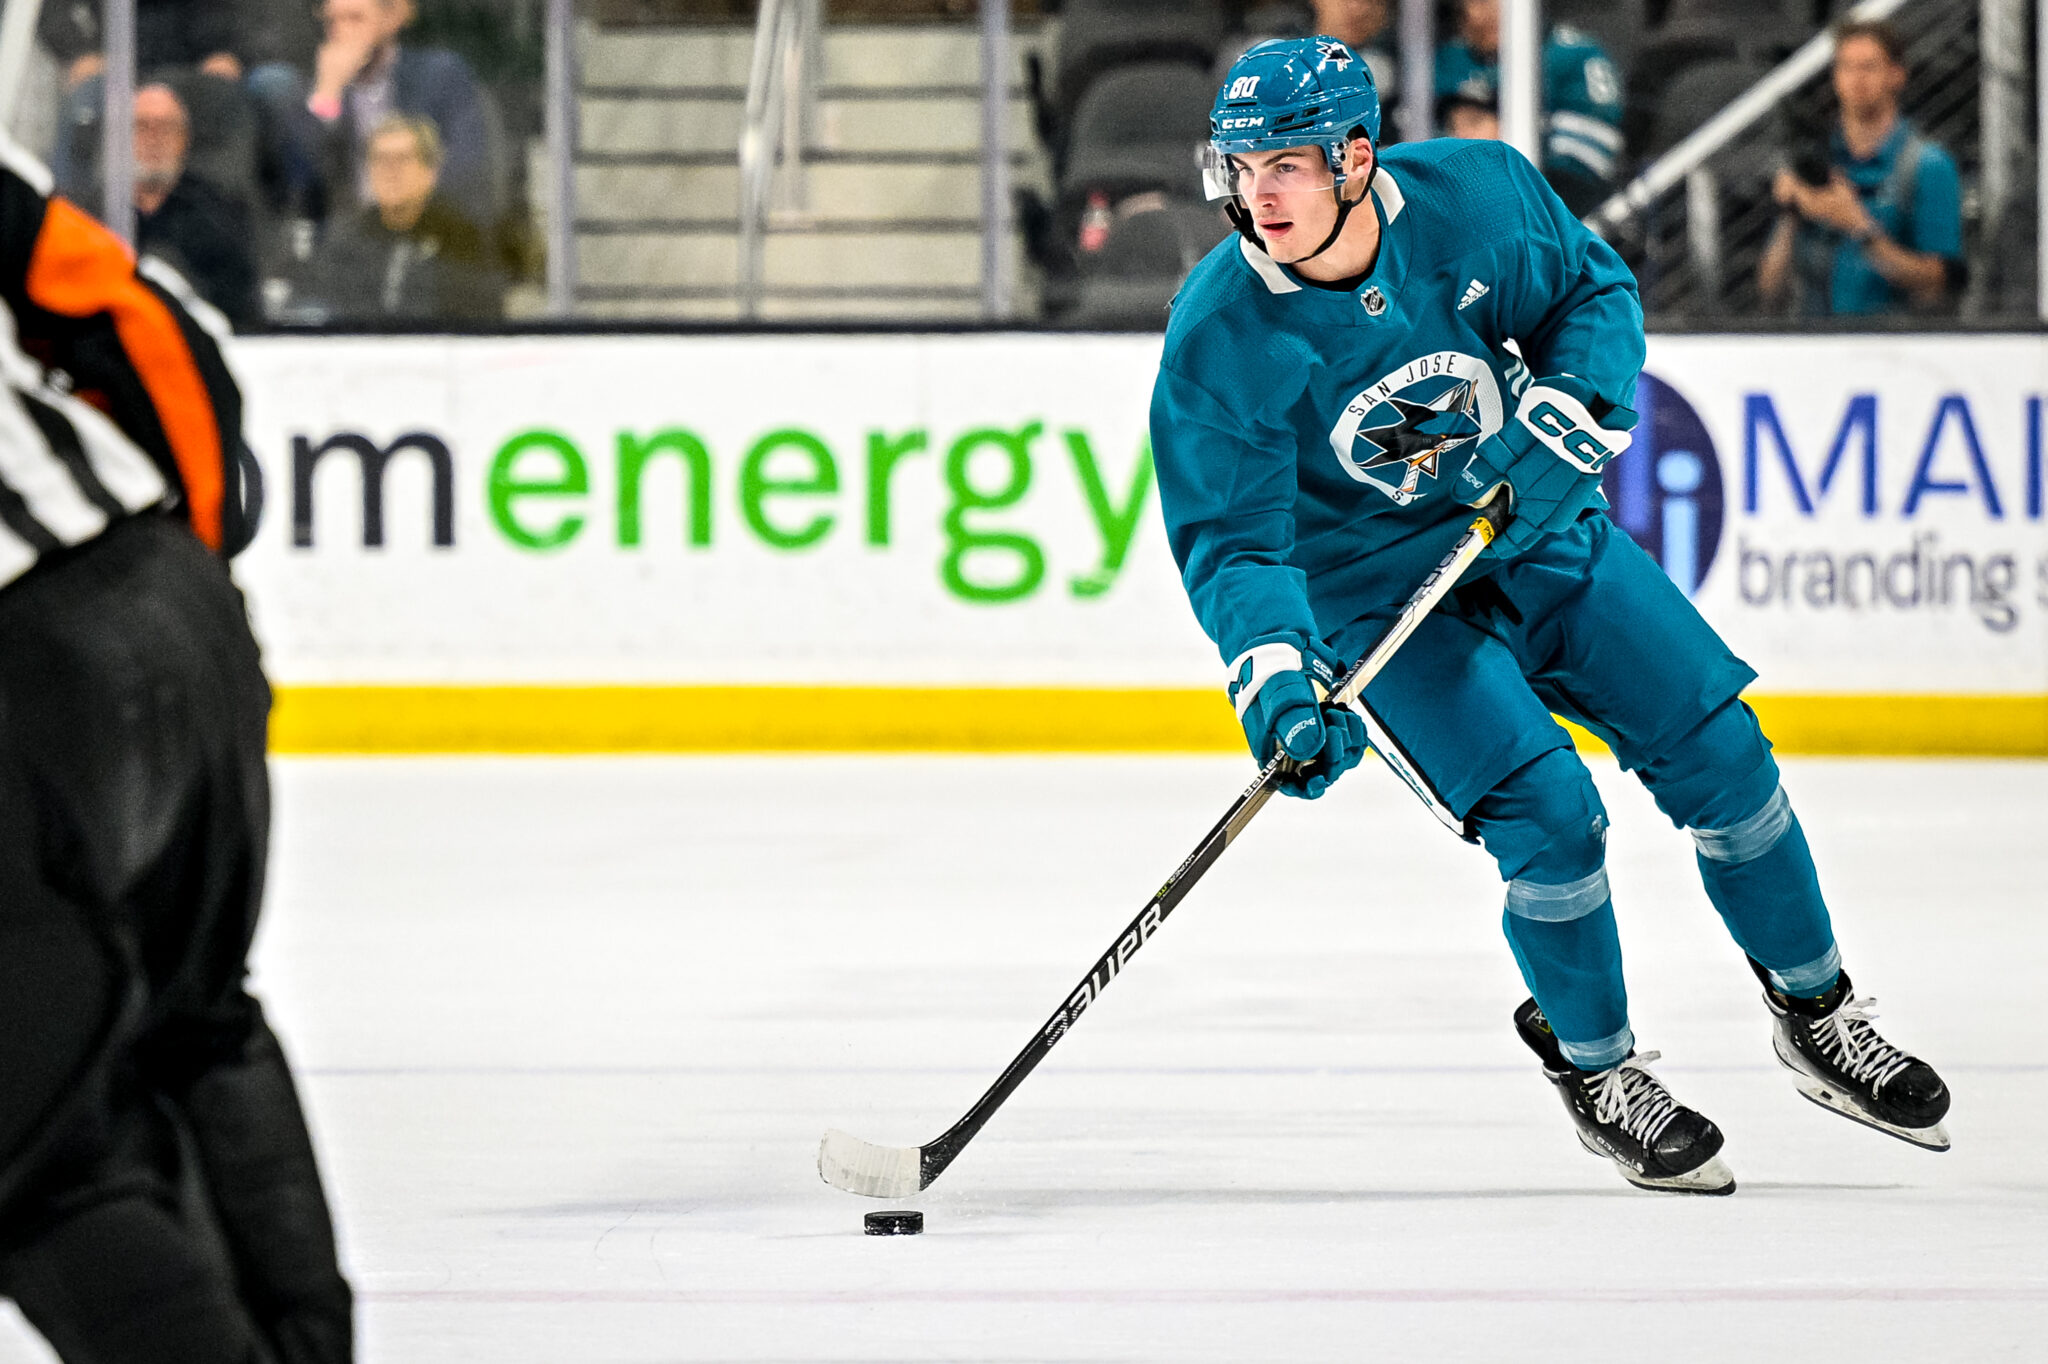 Laubach on Highs, Lows of Being a Sharks Fan San Jose Hockey Now